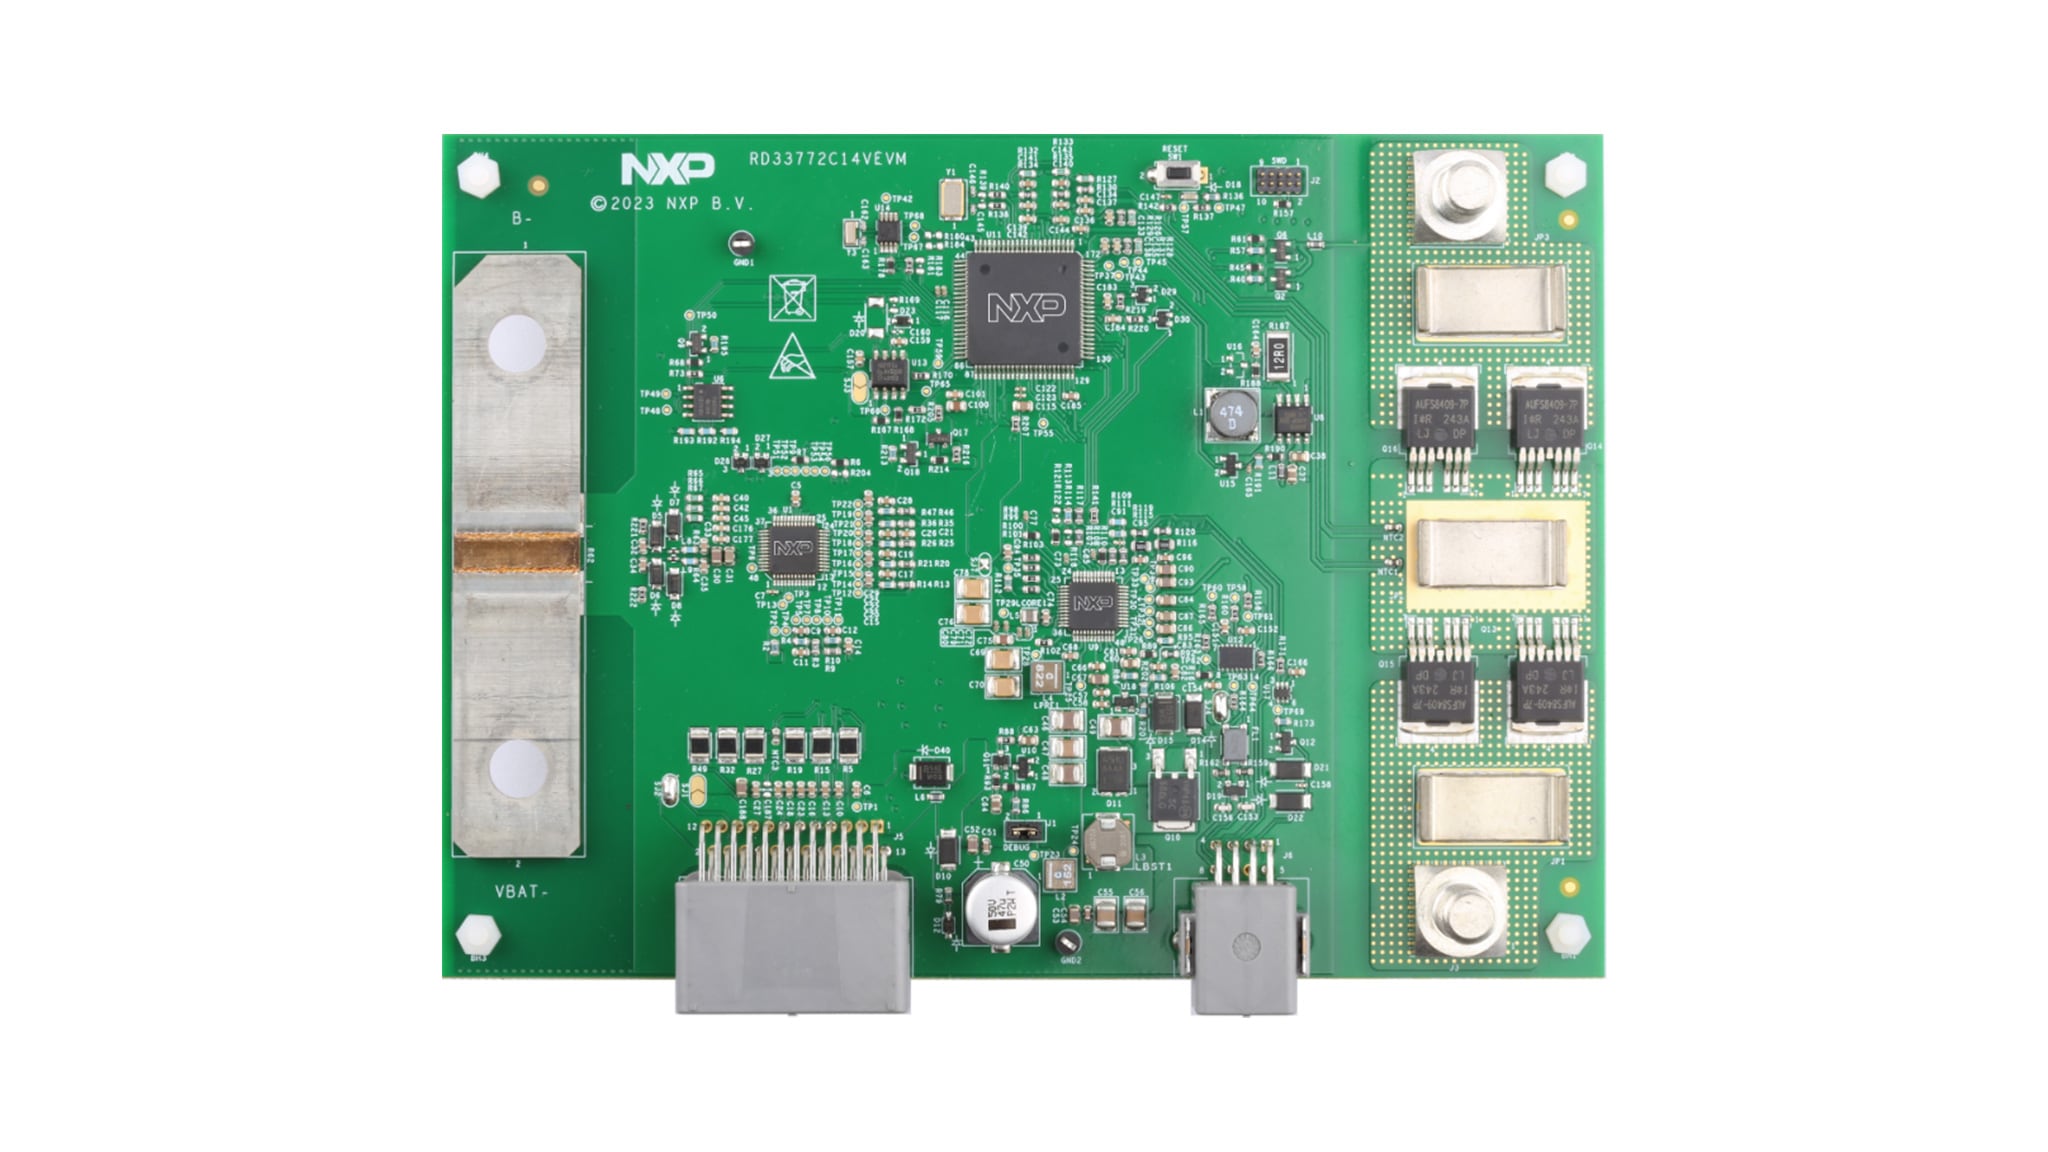 Overview of the RD33772C14VEVM Board